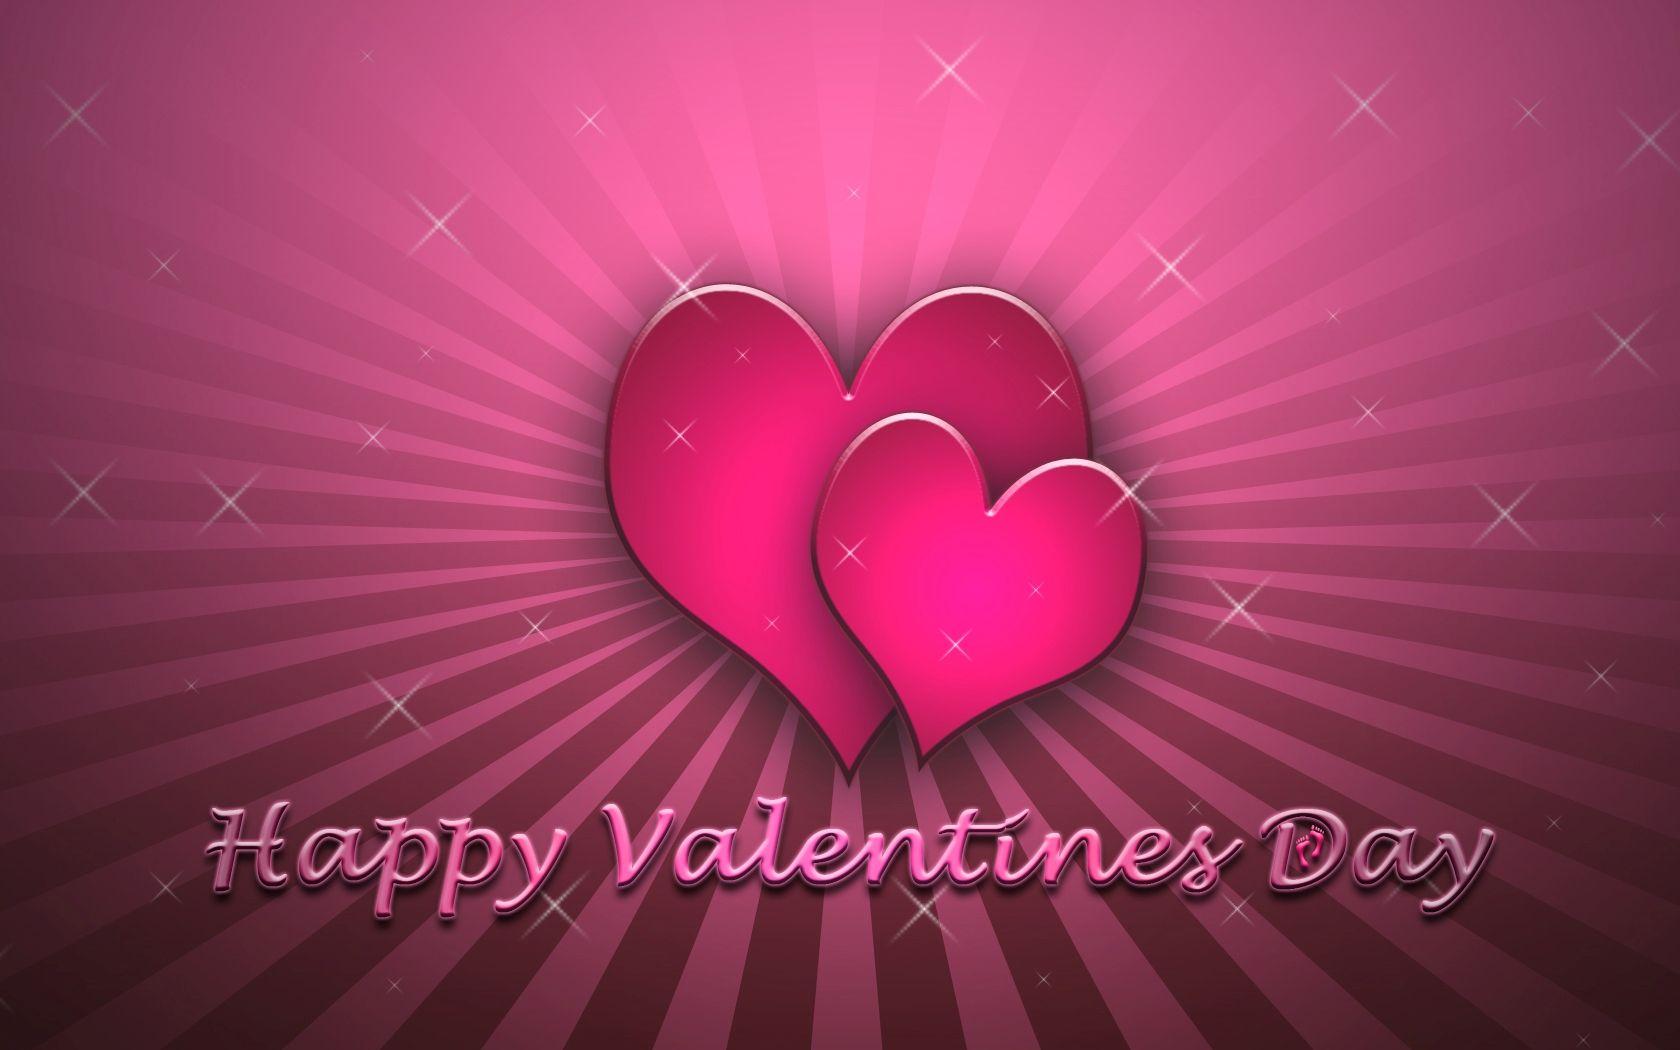 Pink Valentines Day Wallpaper. Zem Wallpaper Is The Best Place